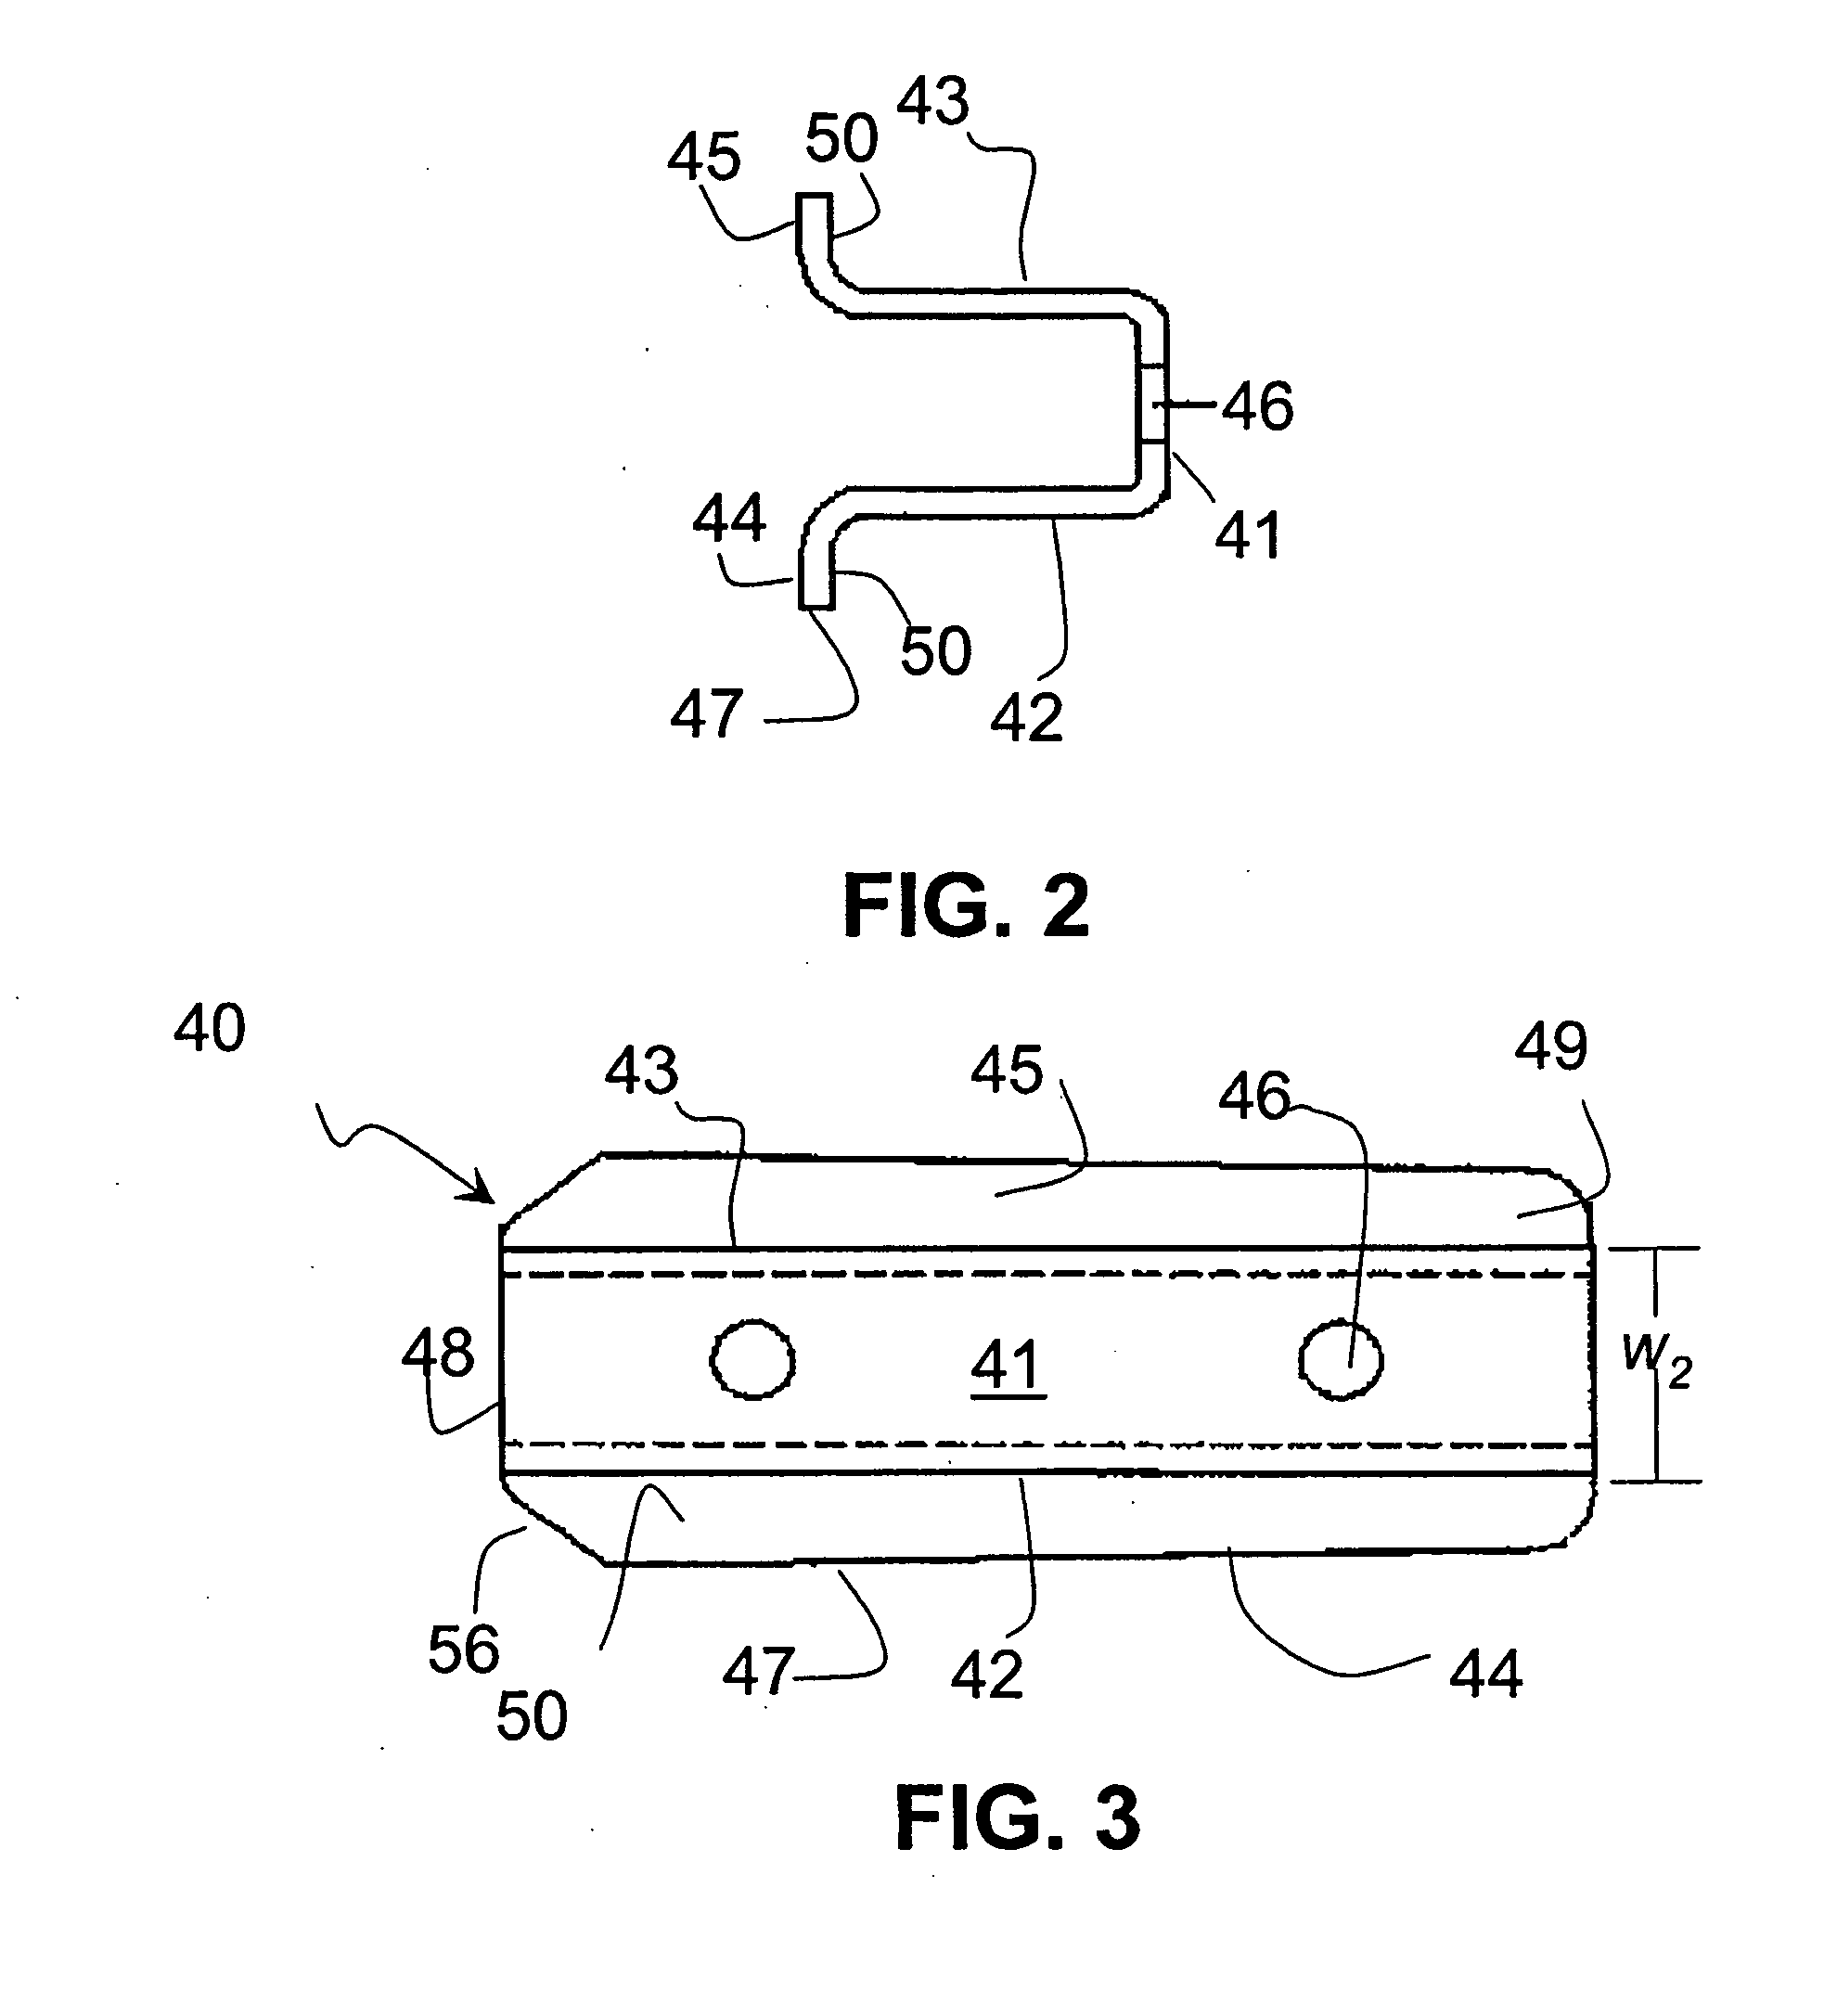 Apparatus and Method for Assembling Structural Components